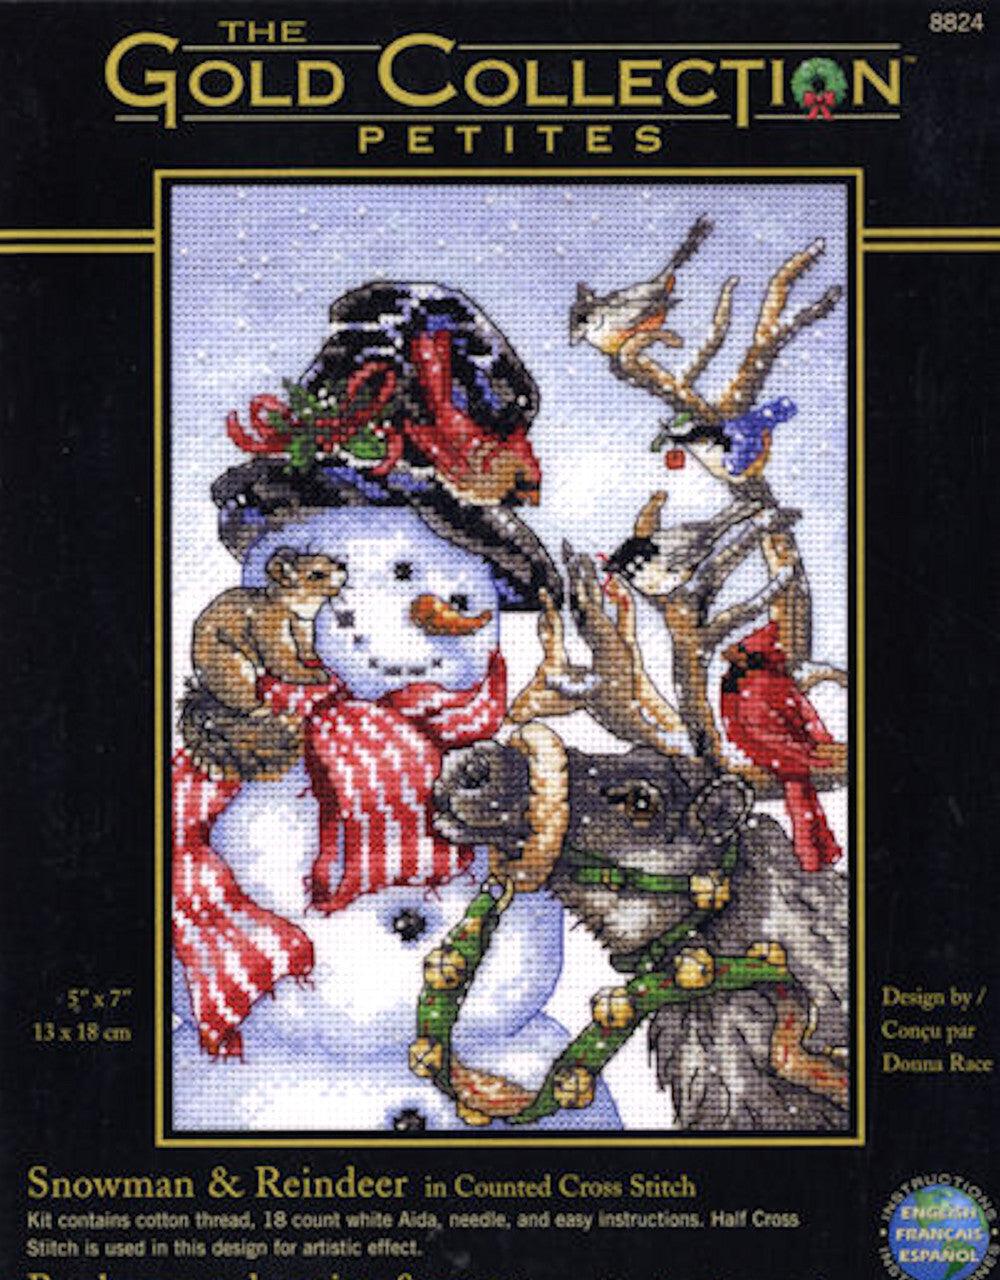 SNOWMAN & REINDEER, Counted Cross Stitch Kit, 18 count white cotton Aida, DIMENSIONS (08824)